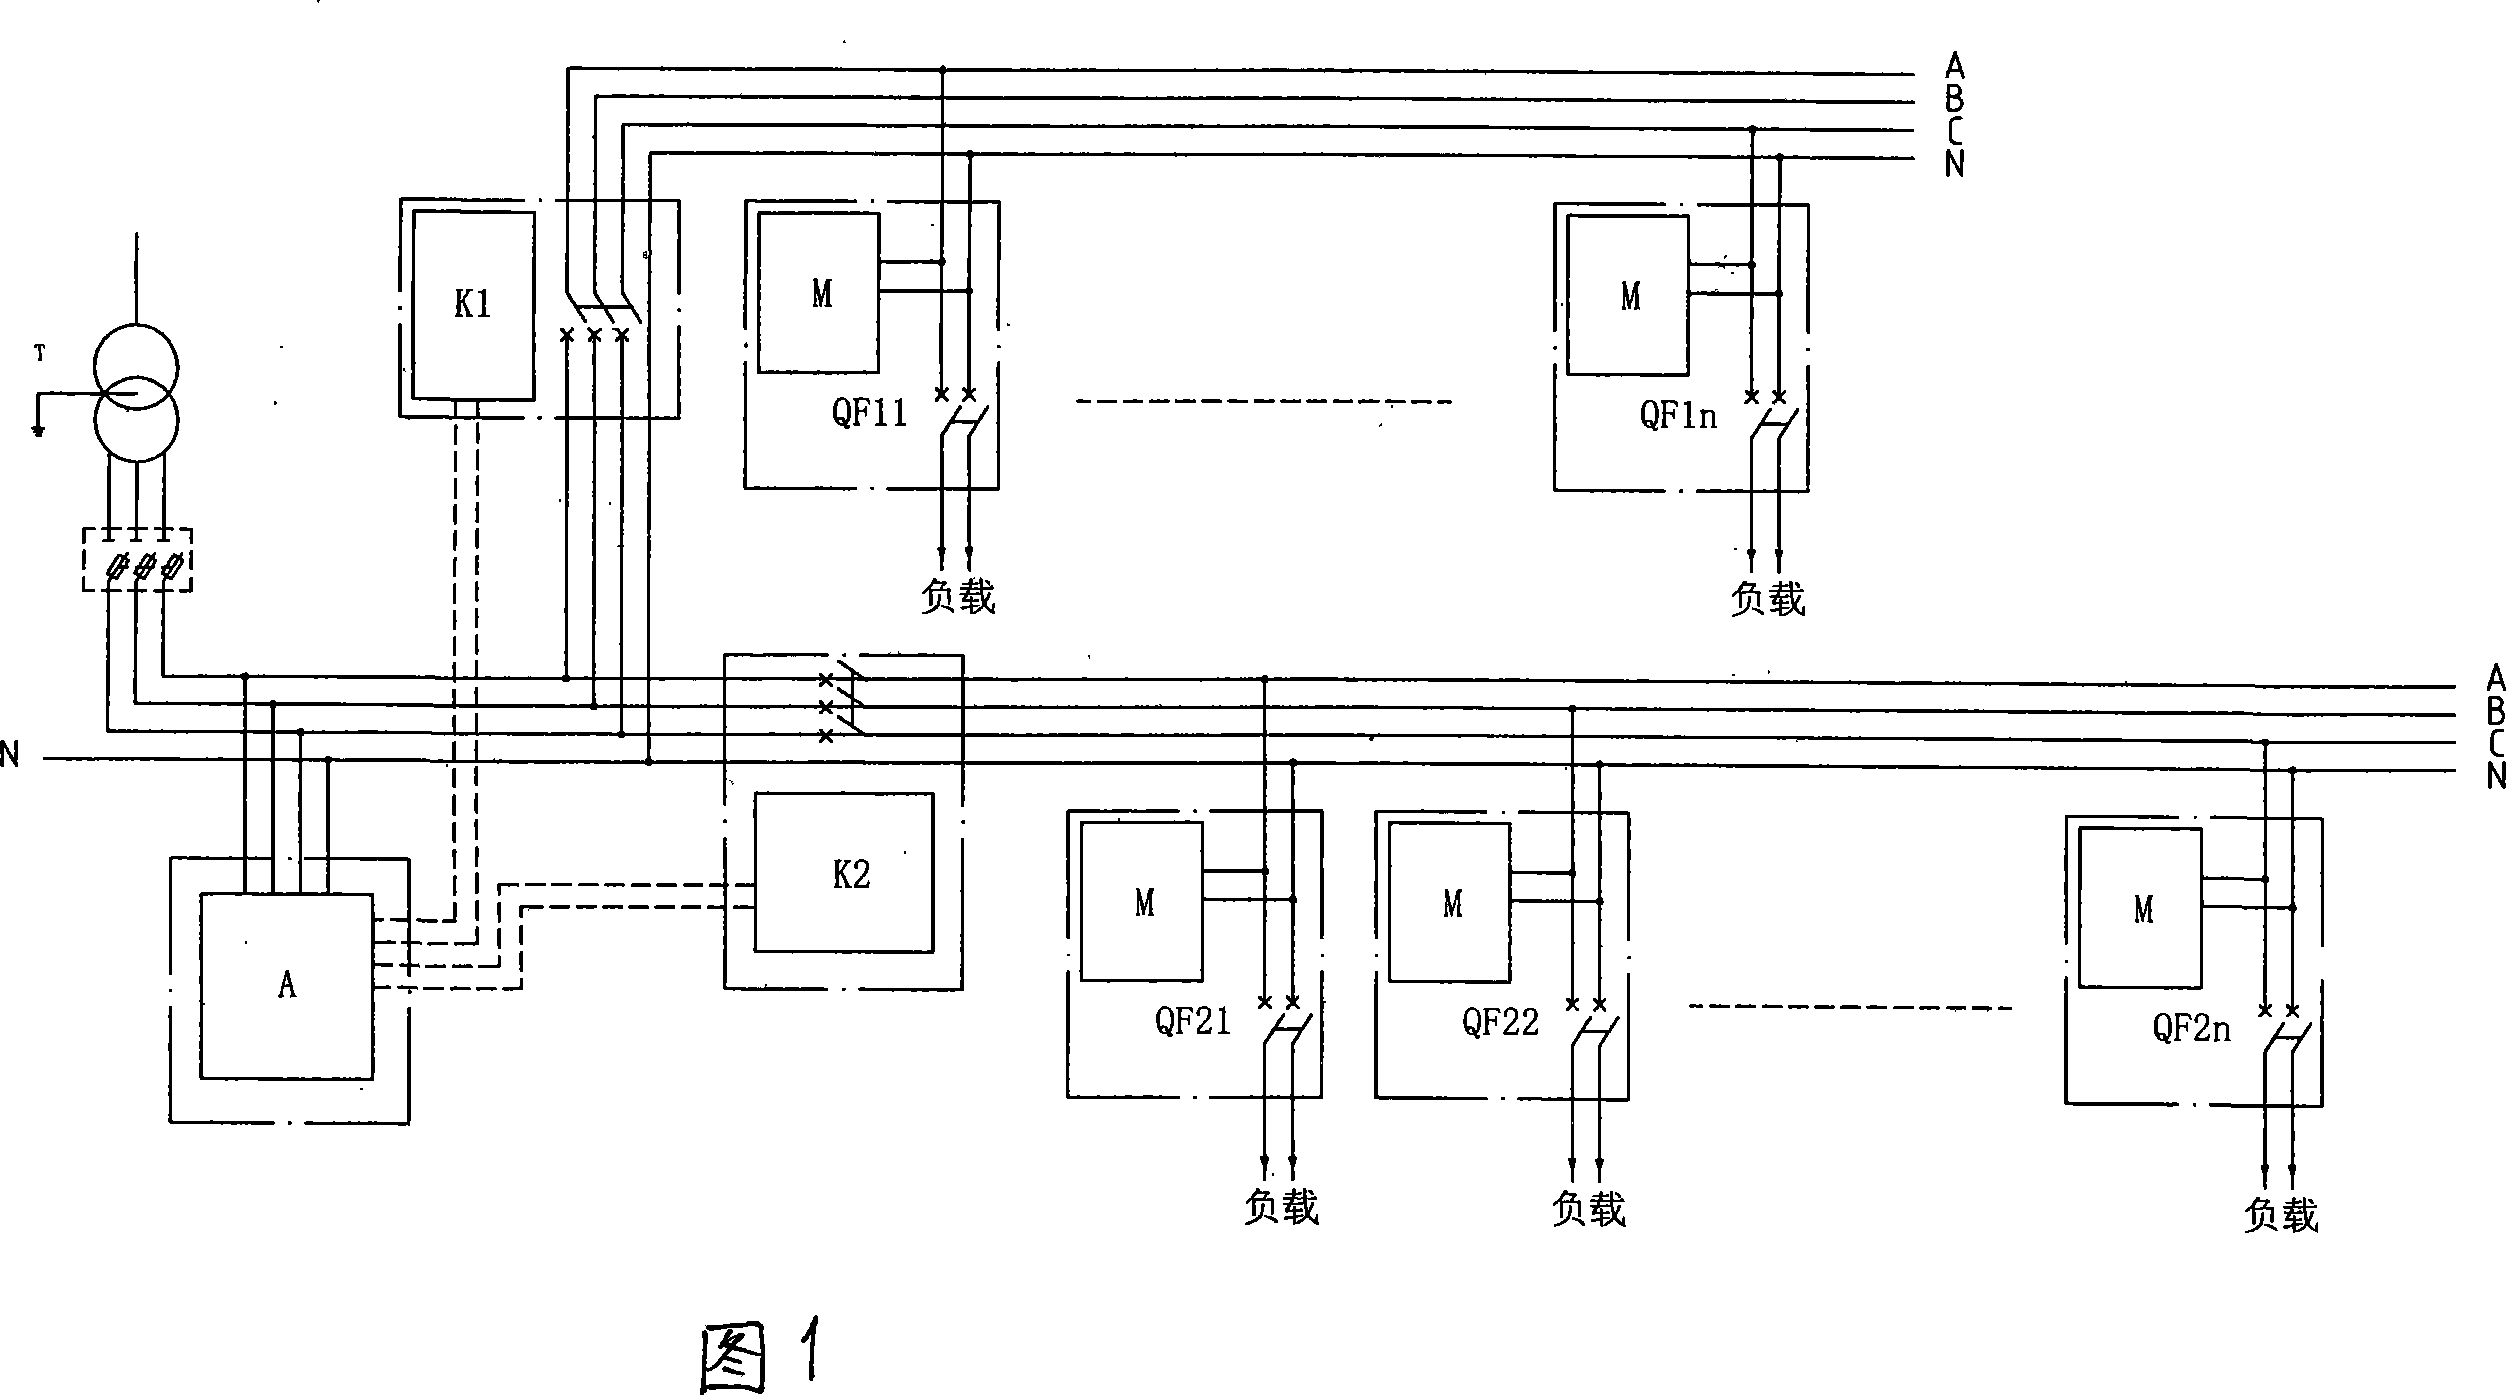 Multi-level switch system for power line disconnection protection